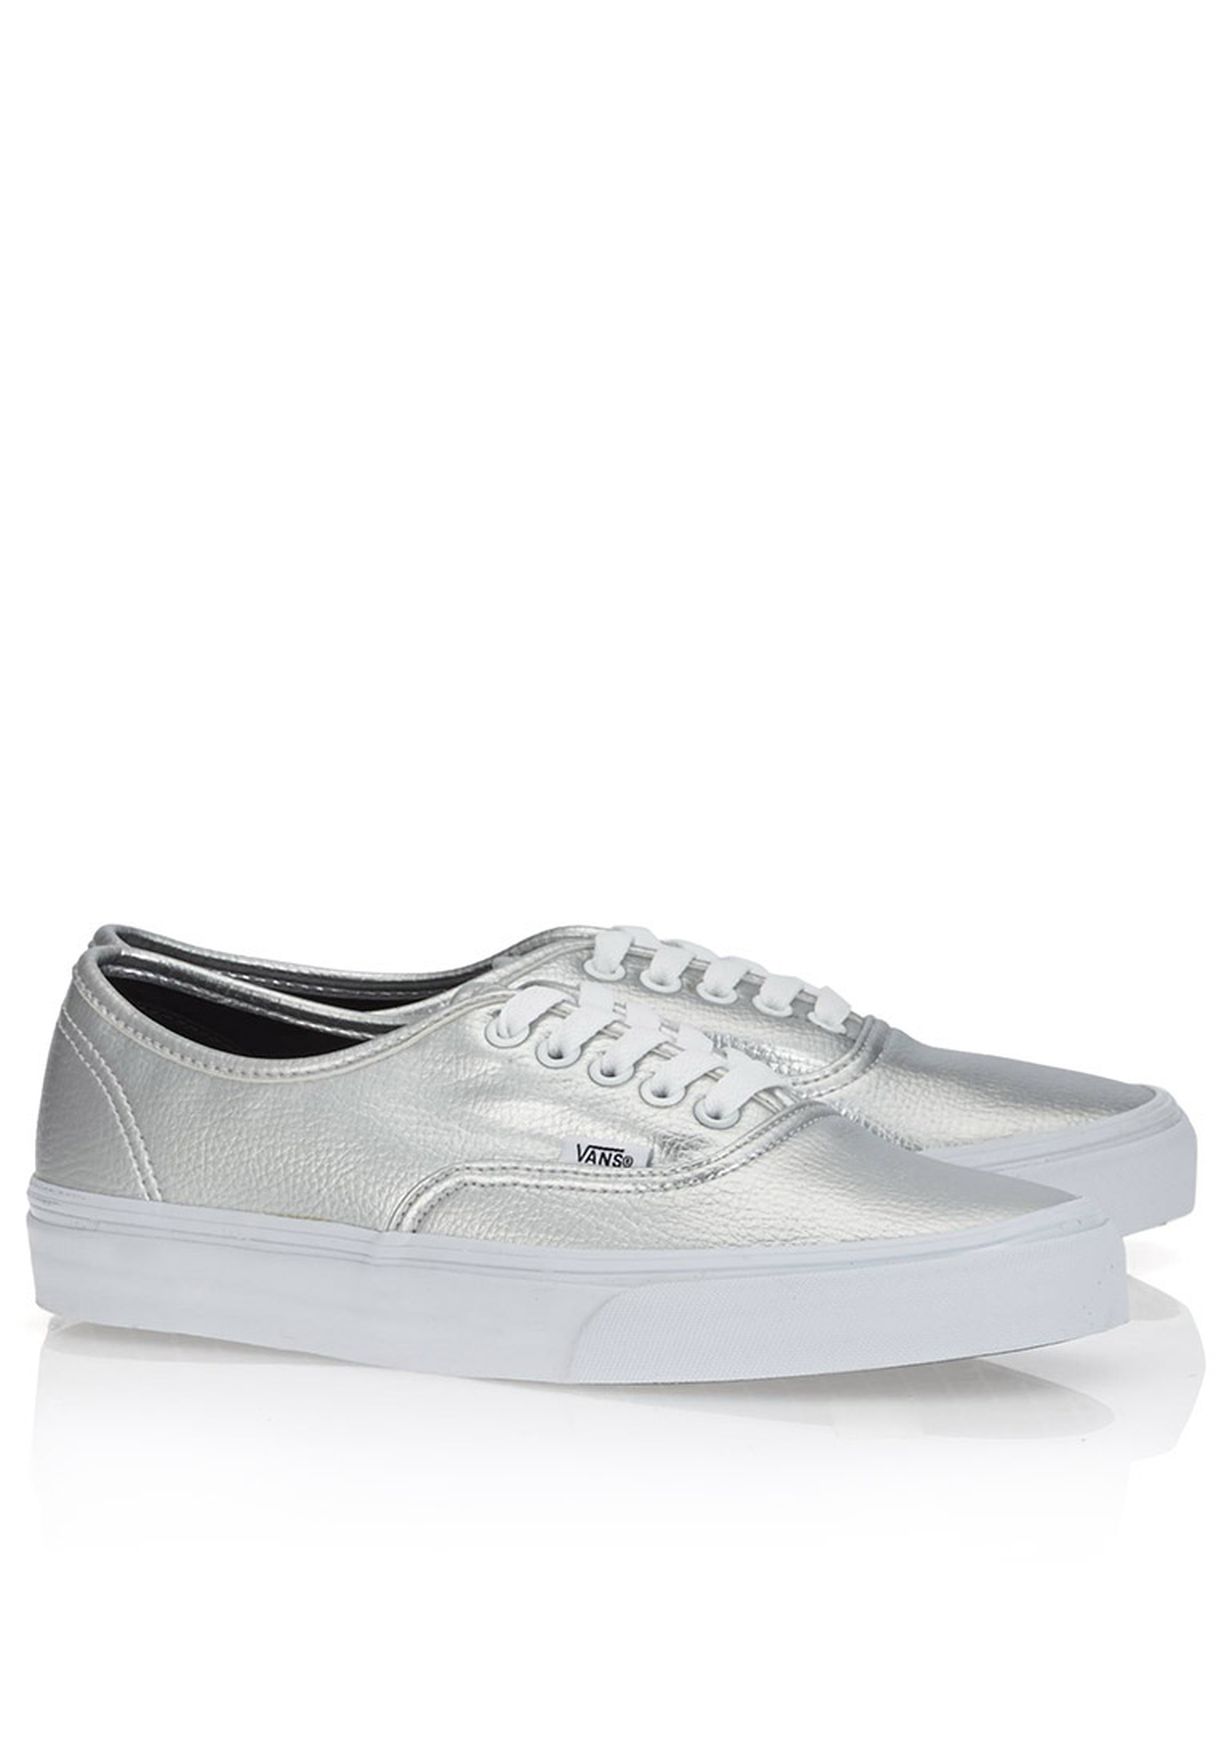 Vans silver Authentic Glitter Sneakers 